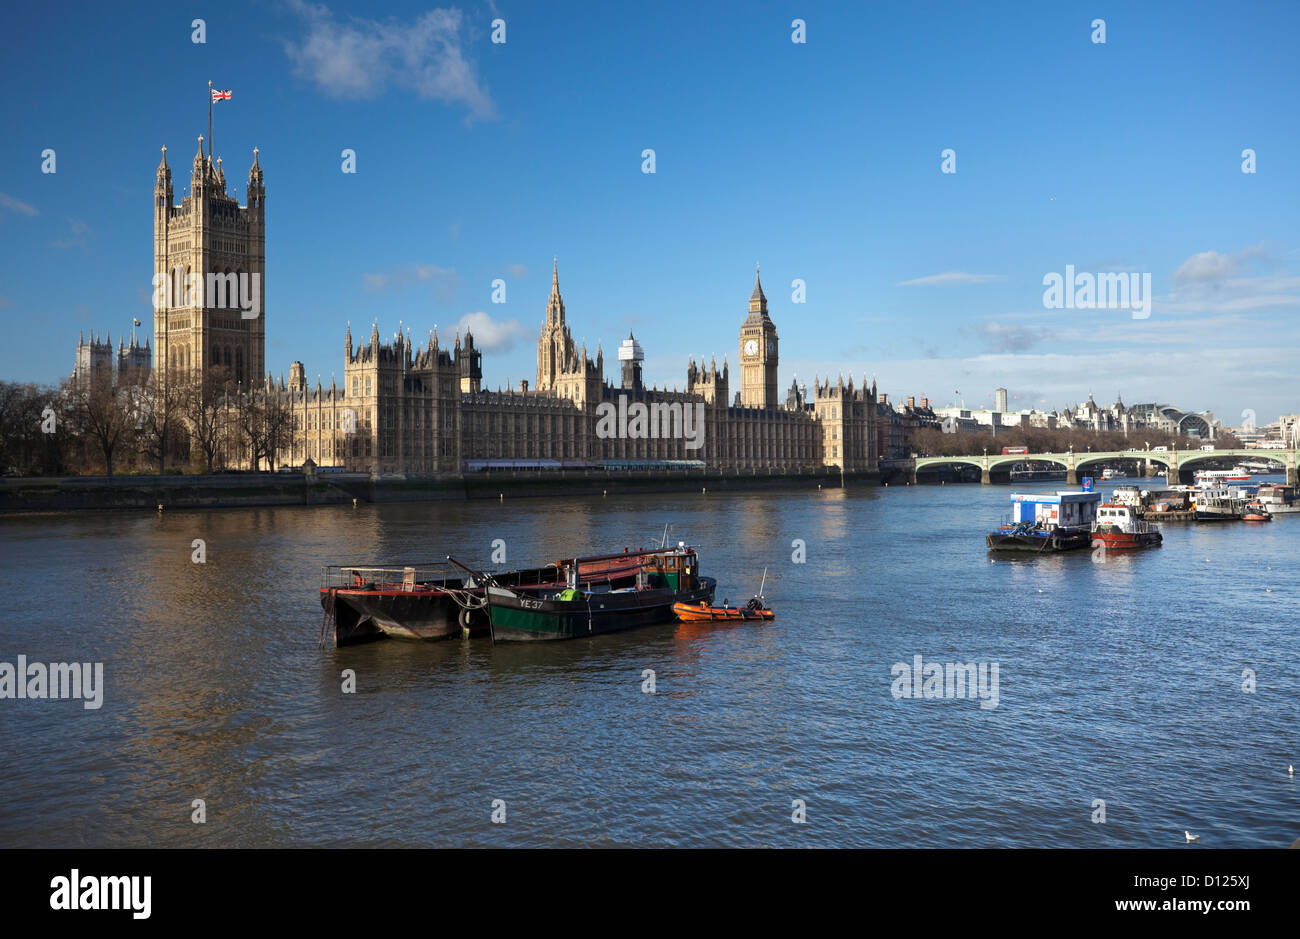 The River Thames and the Palace of Westminster, London, England, UK. Stock Photo